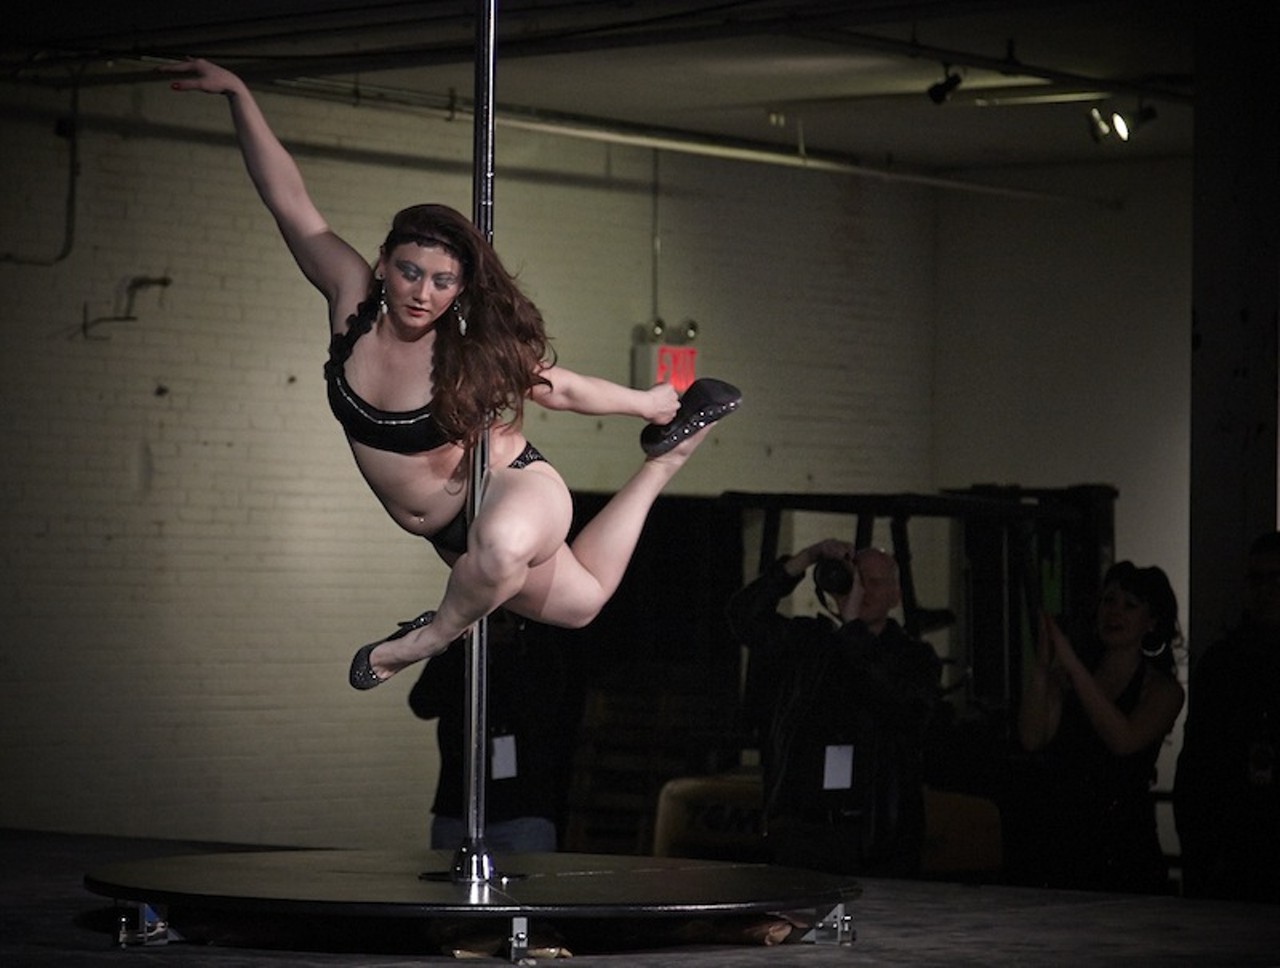 The Gateway Pole Dance Competition, 2013 (NSFW)